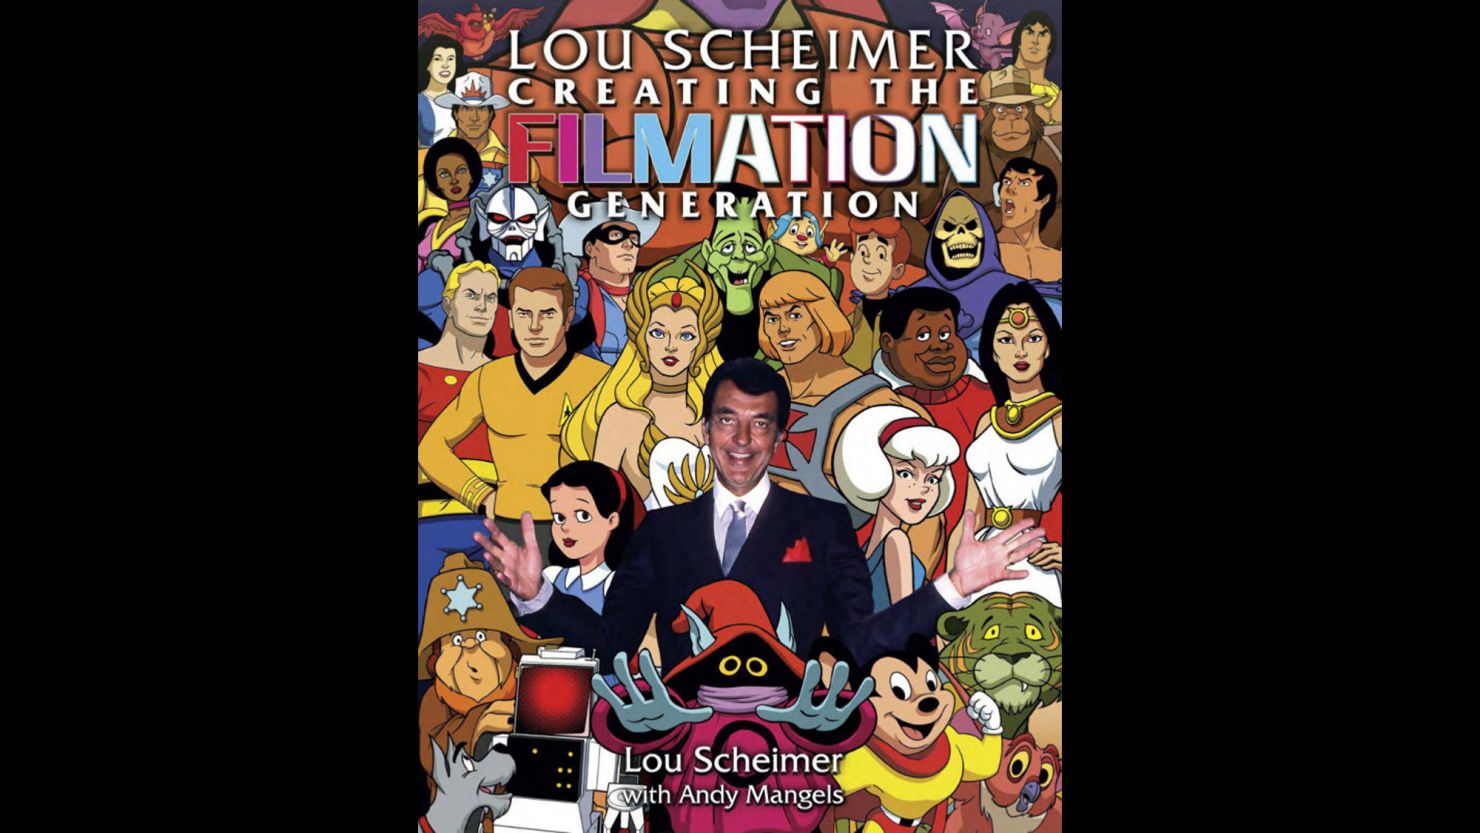 Lou Scheimer, co-founder of Filmation, tells his story in the book "Lou Scheimer: Creating the Filmation Generation."